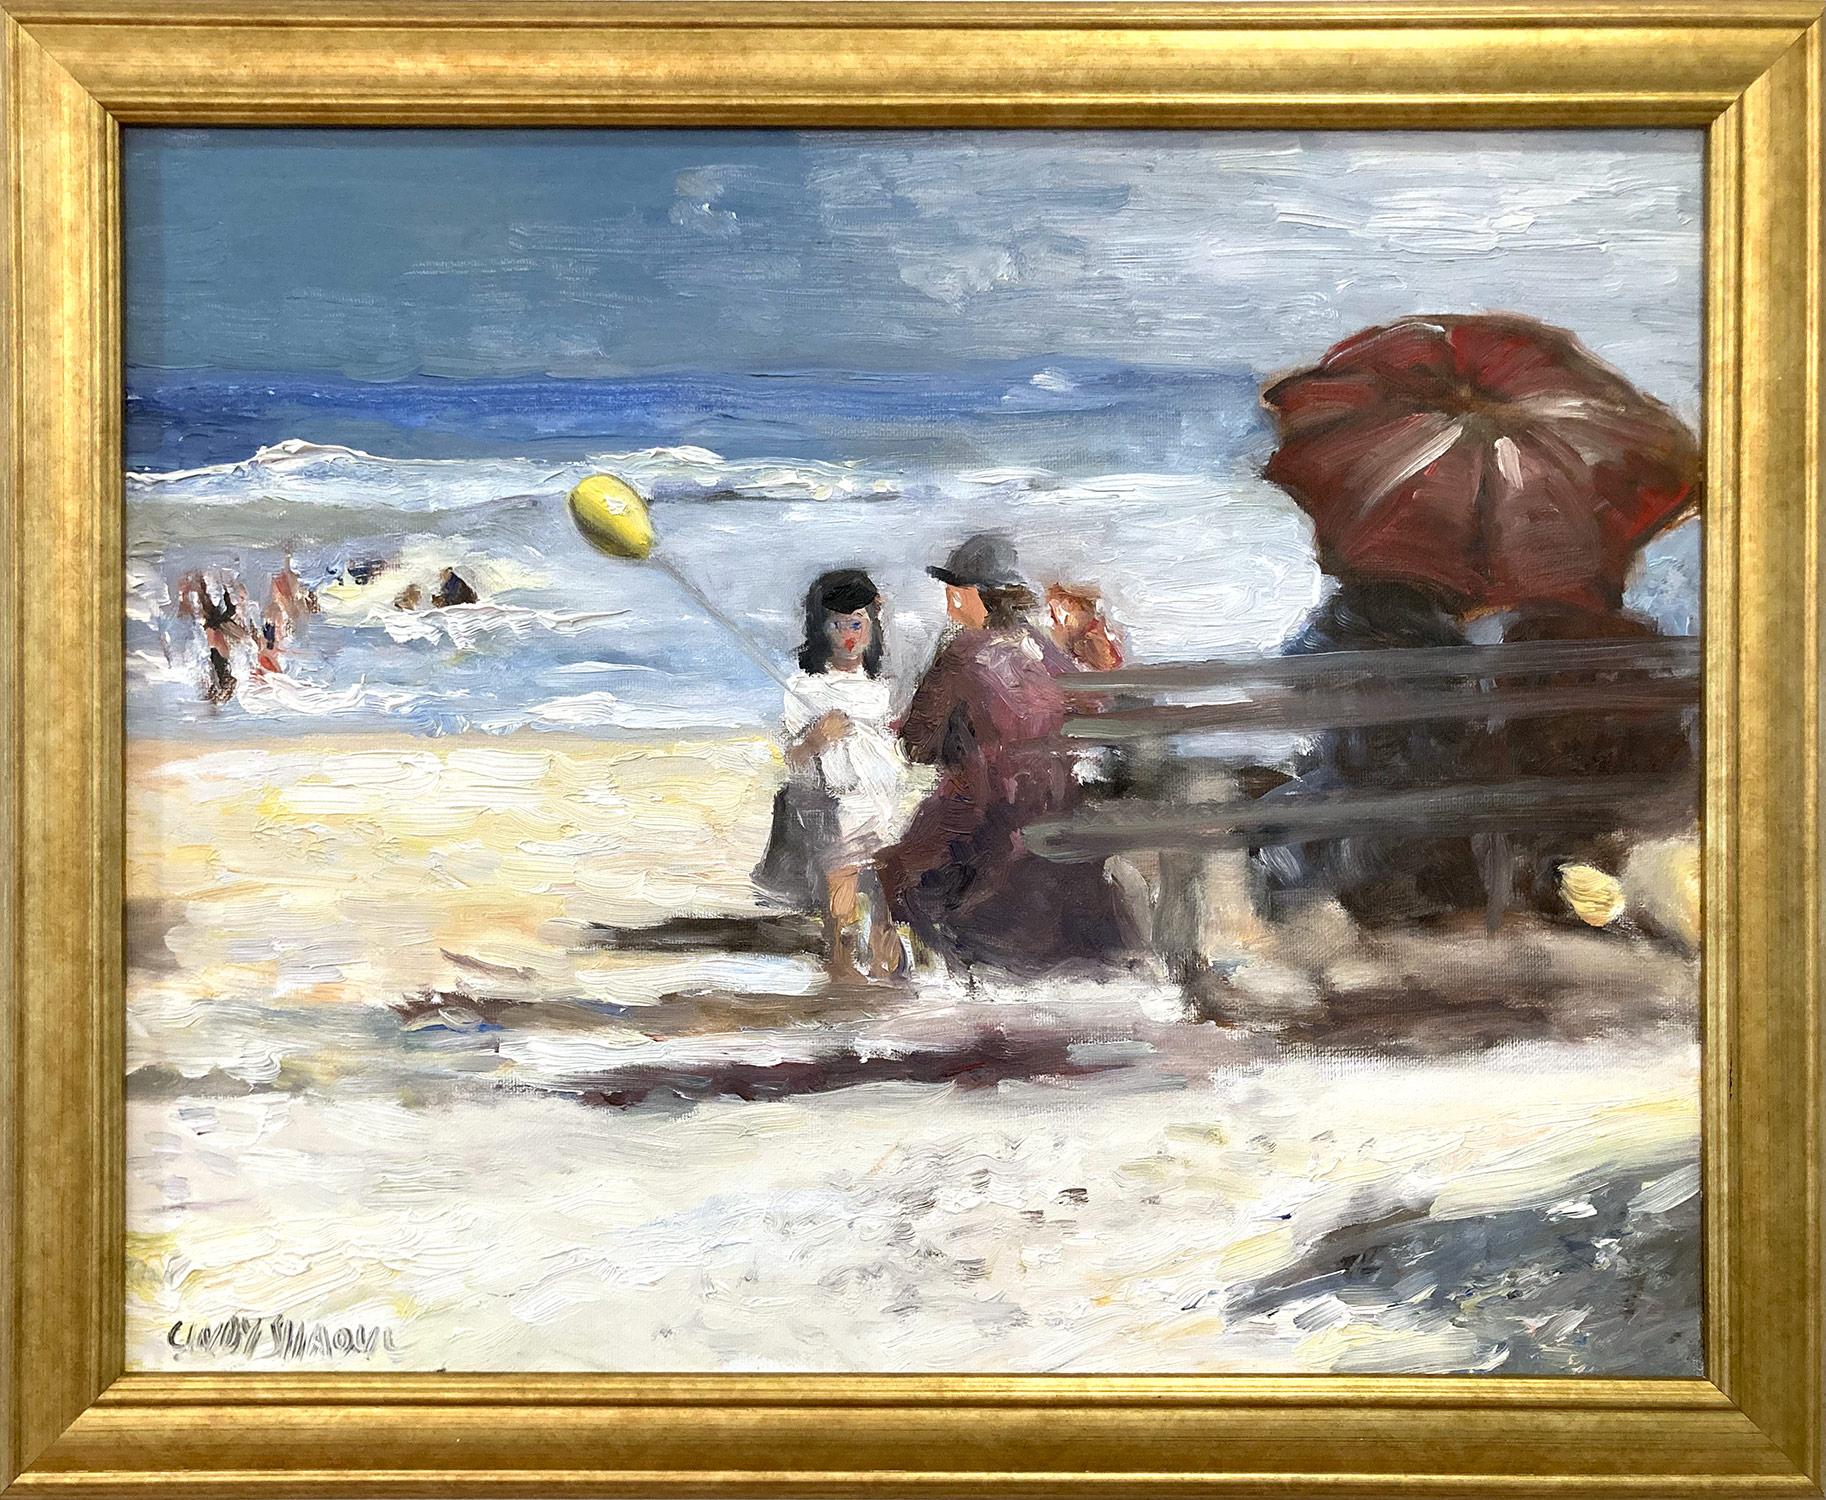 Cindy Shaoul Landscape Painting – "Kids on the Beach" Impressionistic Beach Scene in Style of Edward Potthast 